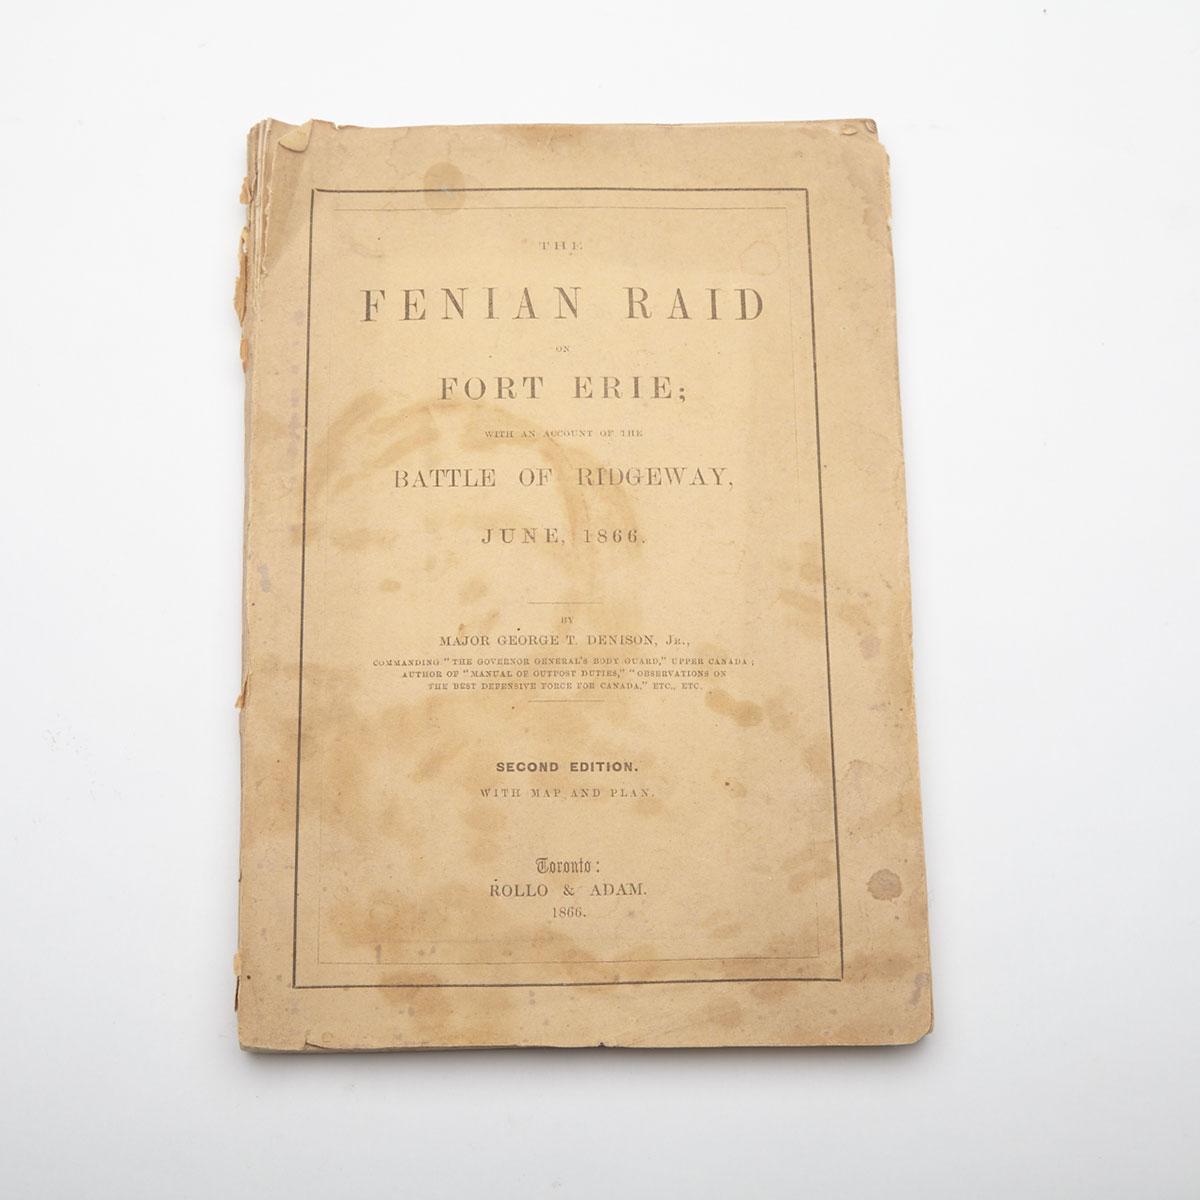 Pamphlet: The Fenian Raid on Fort Erie; with an Account of the Battle of Ridgeway, Major George T. Denison, Jr., June 1866